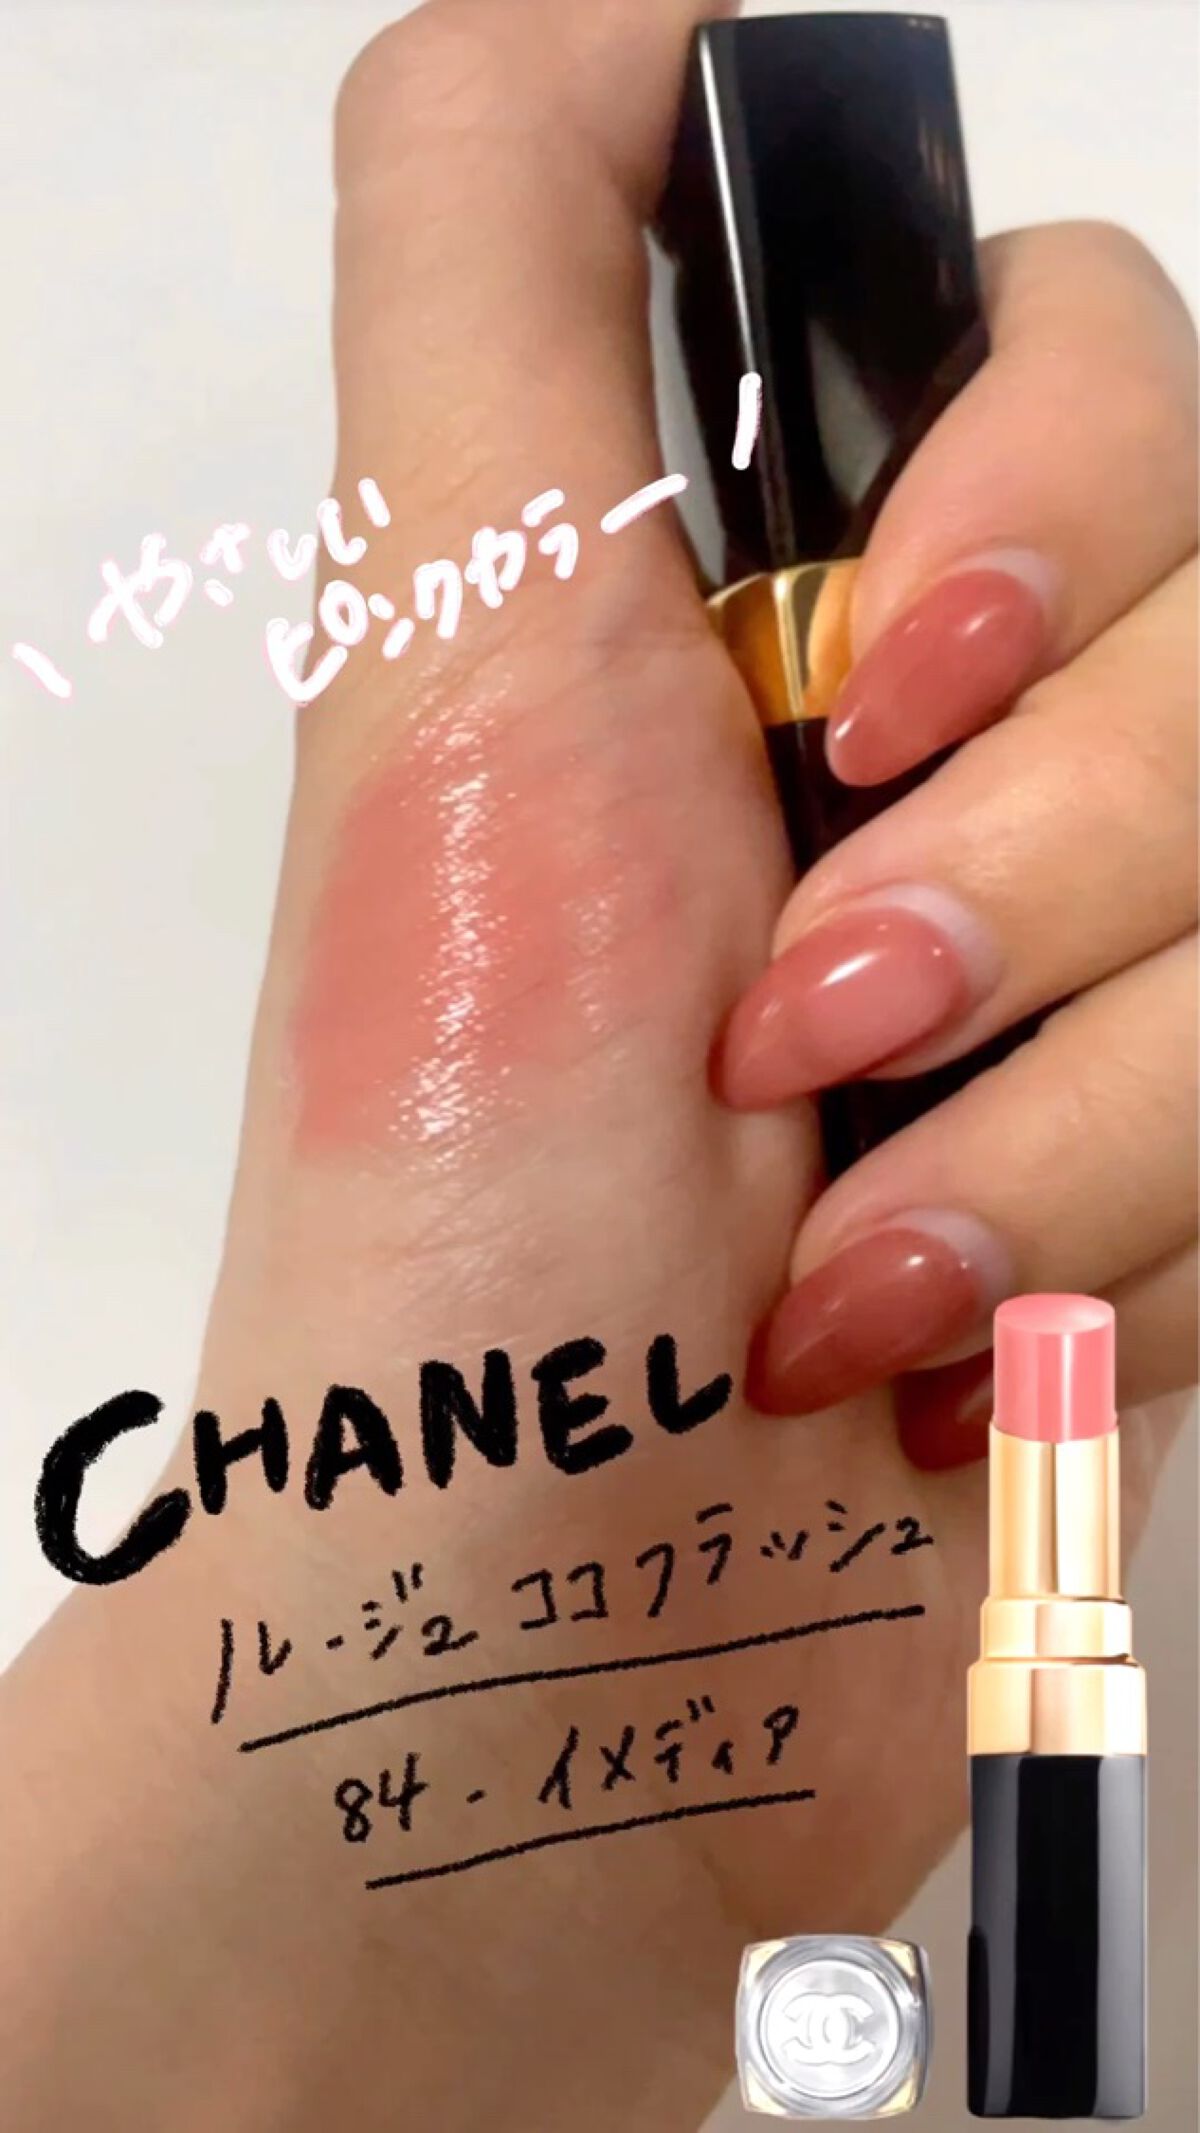 CHANEL ROUGE COCO FLASH 84 immediat